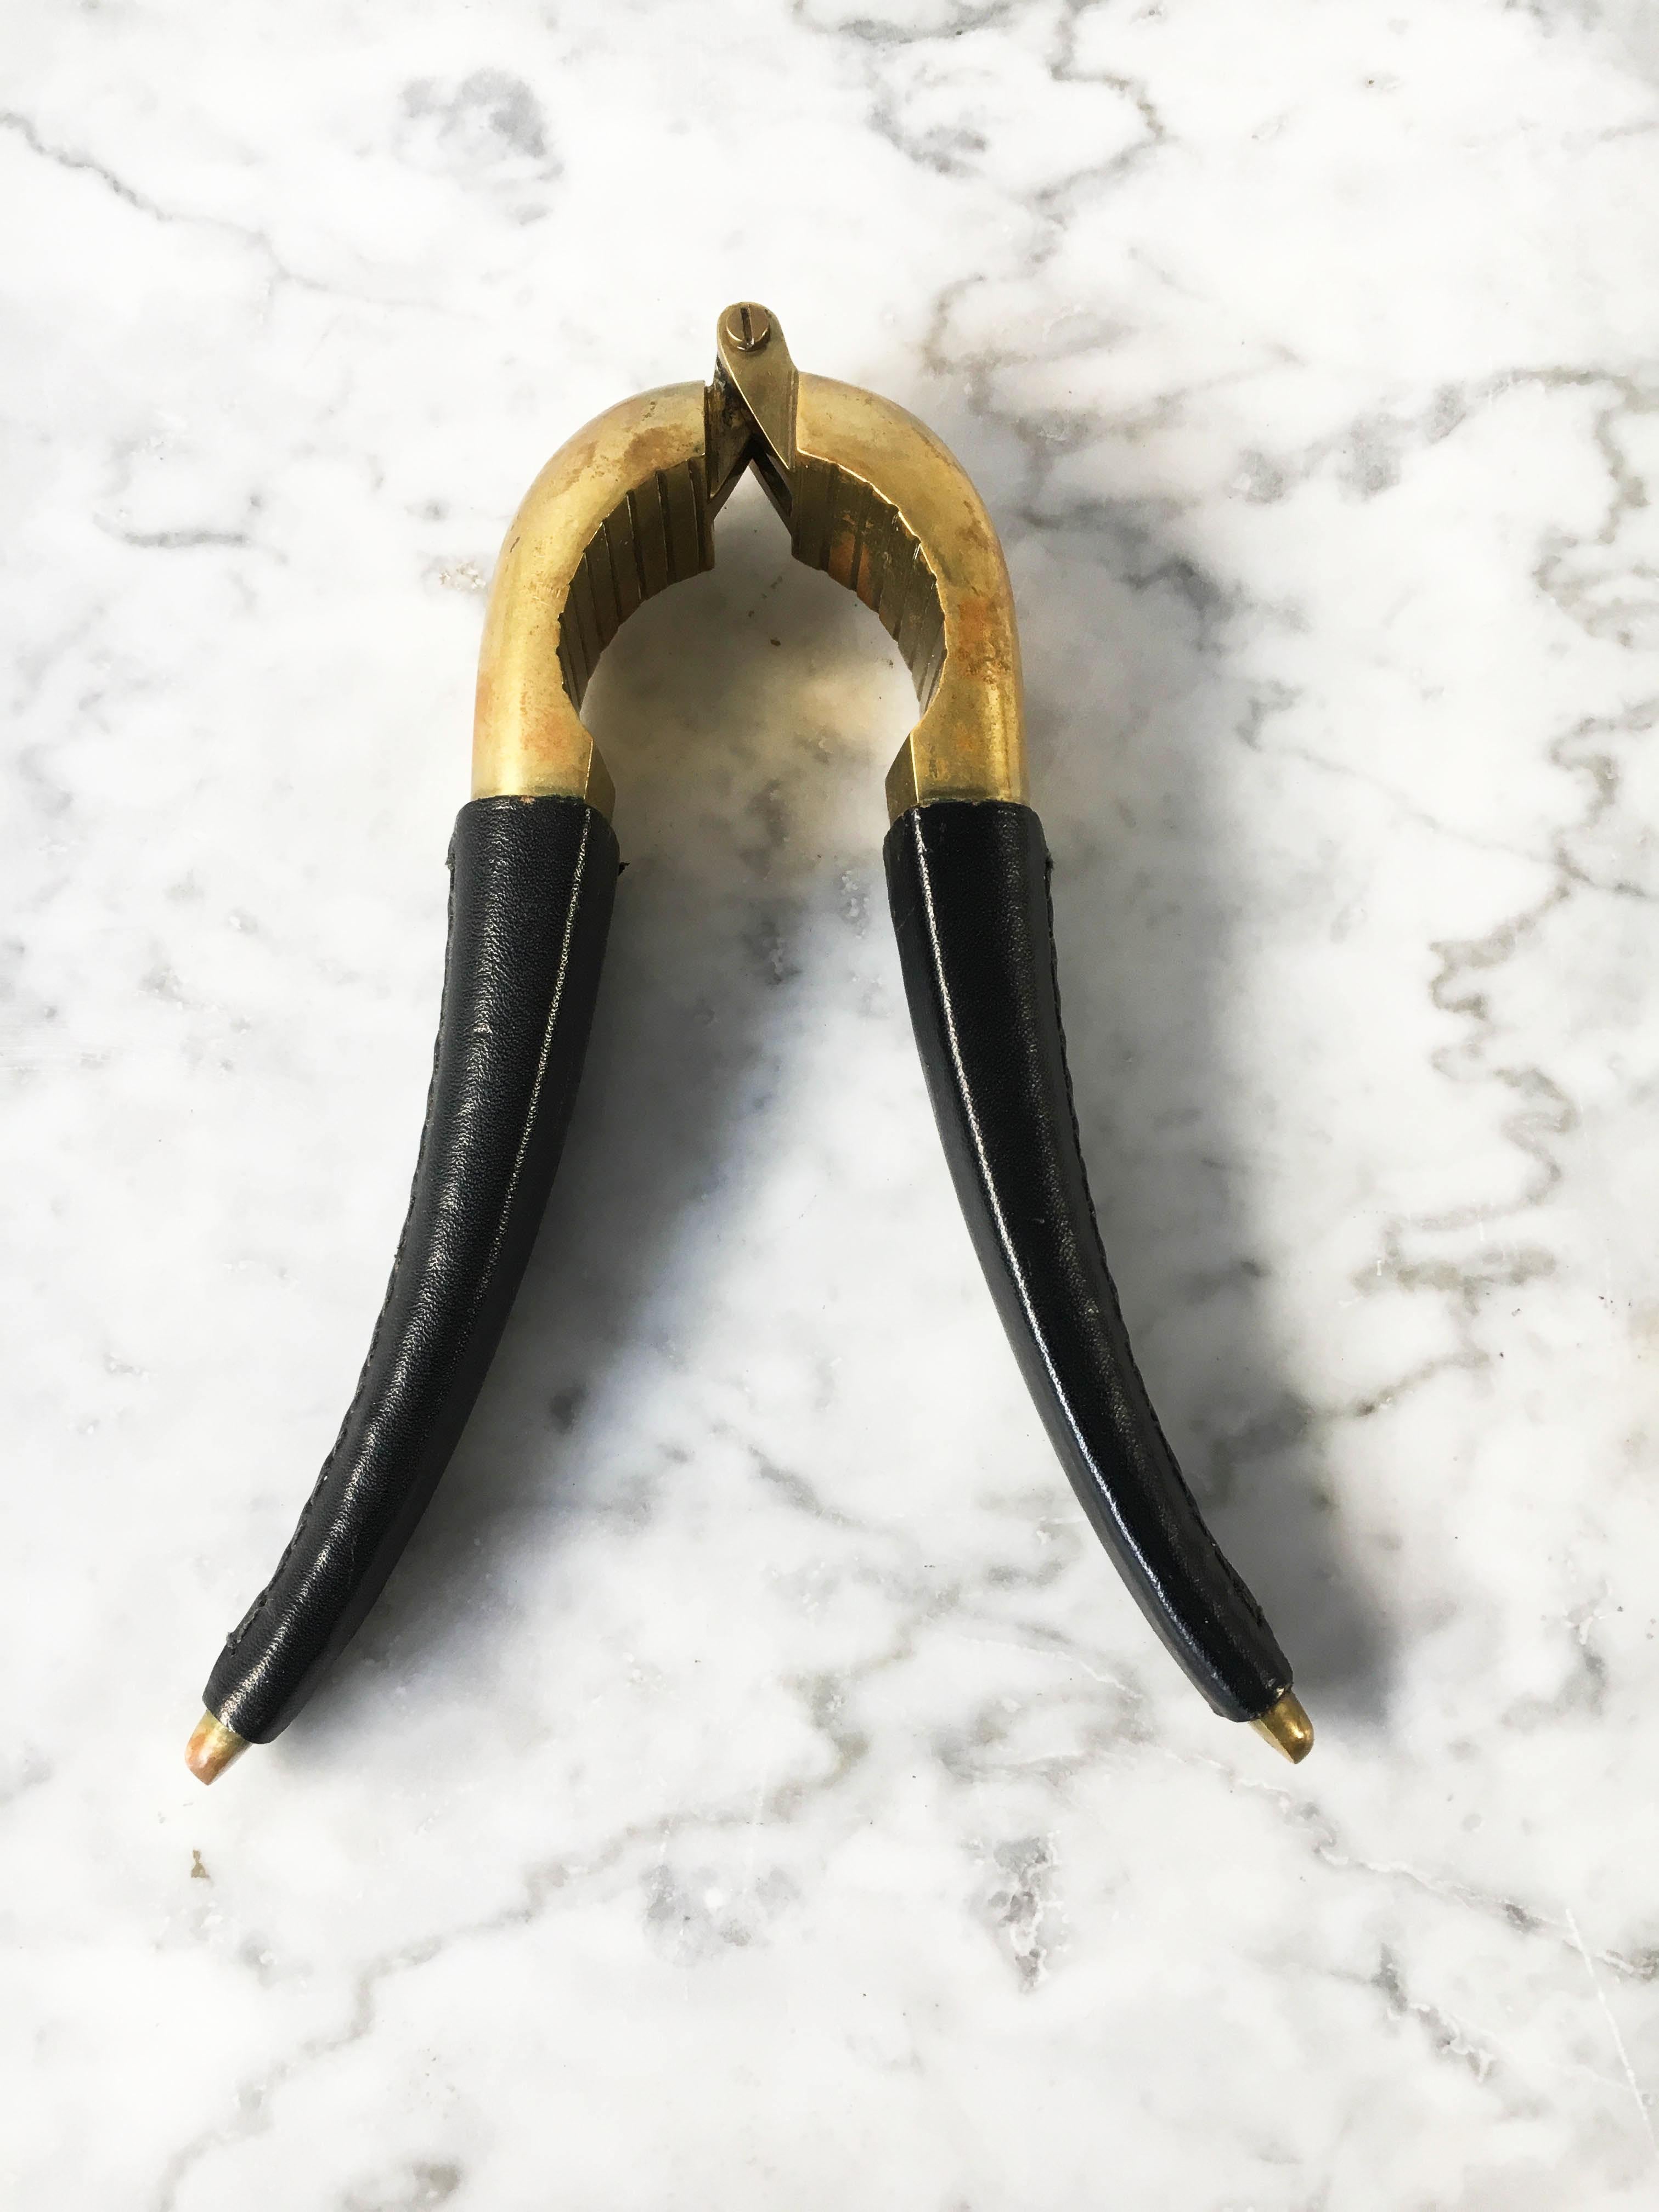 A beautiful sculptural nutcracker, model 4051, designed 1942 by Carl Auböck. Cast brass, the handle is covered by black leather. In excellent vintage condition with just the right amount of gently aged patina on the brass and leather.
 